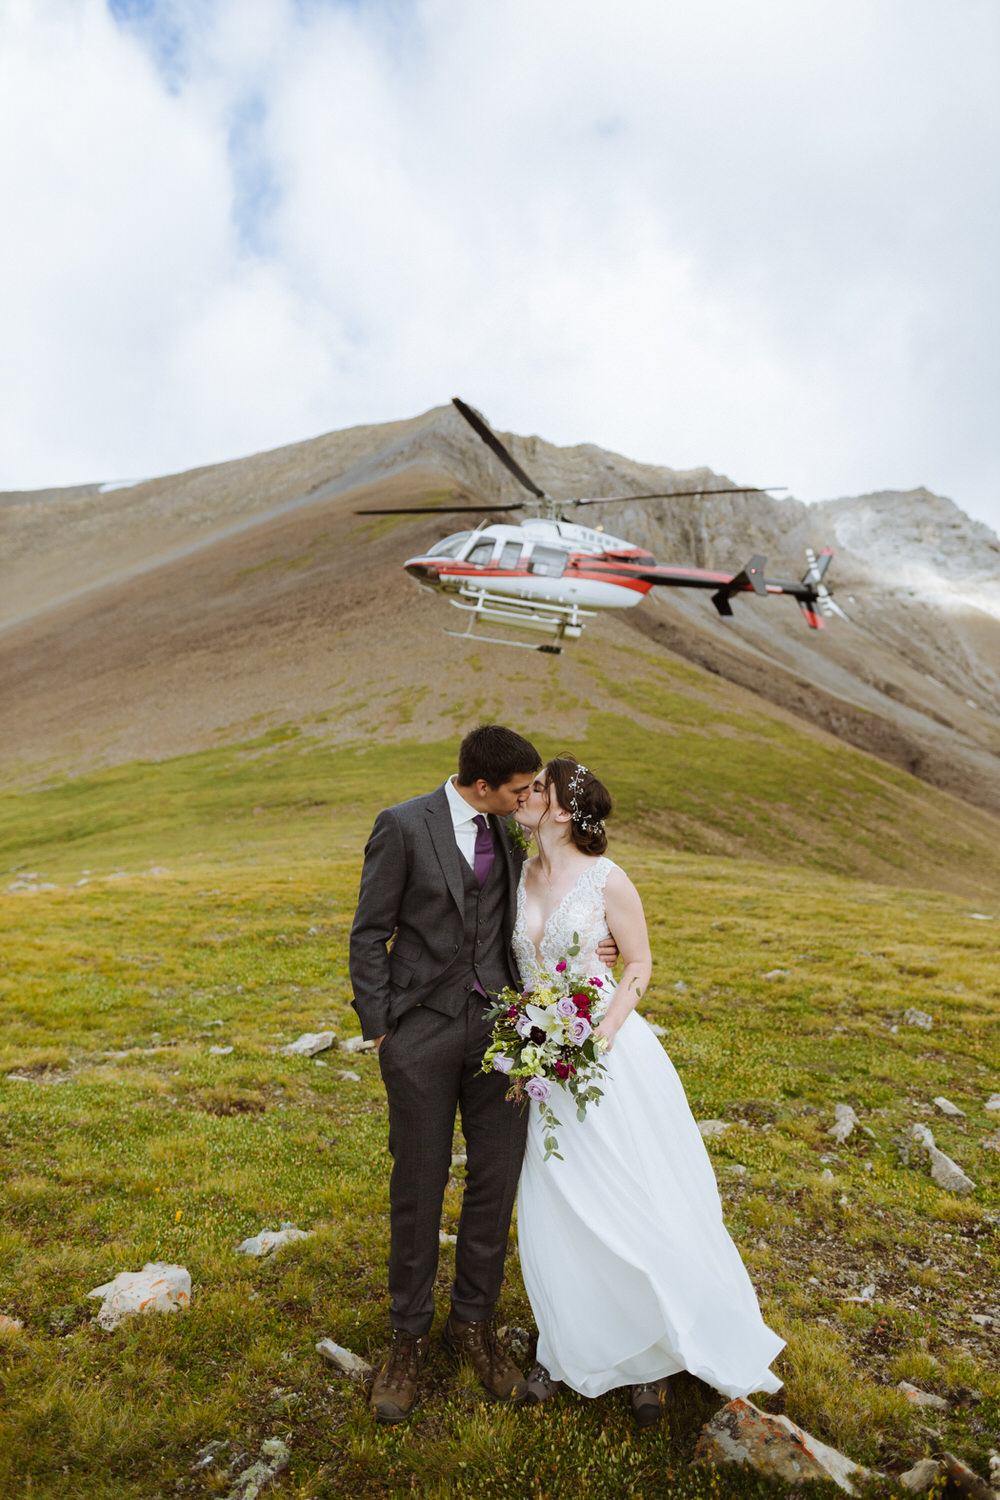 Banff helicopter wedding near Canmore, Alberta